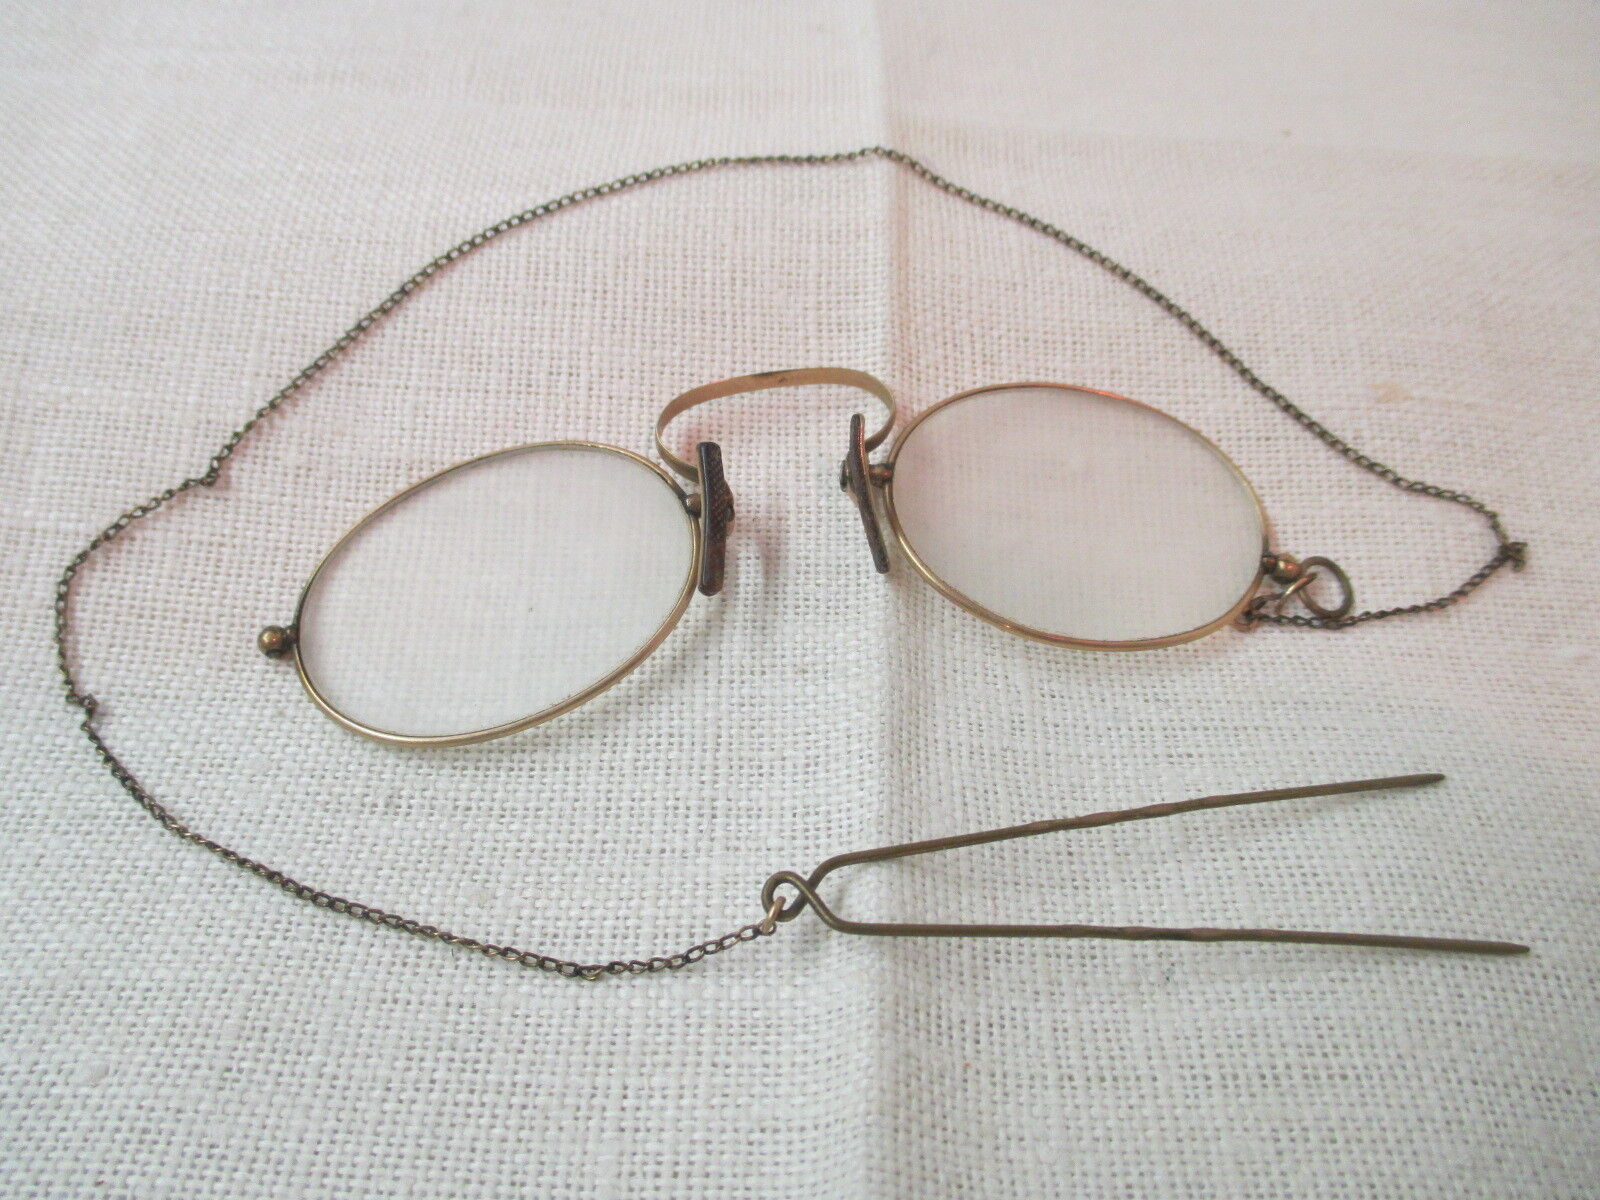 American Optical gold plated Prince Nez Eyeglasses w/ chain Hair Pin |